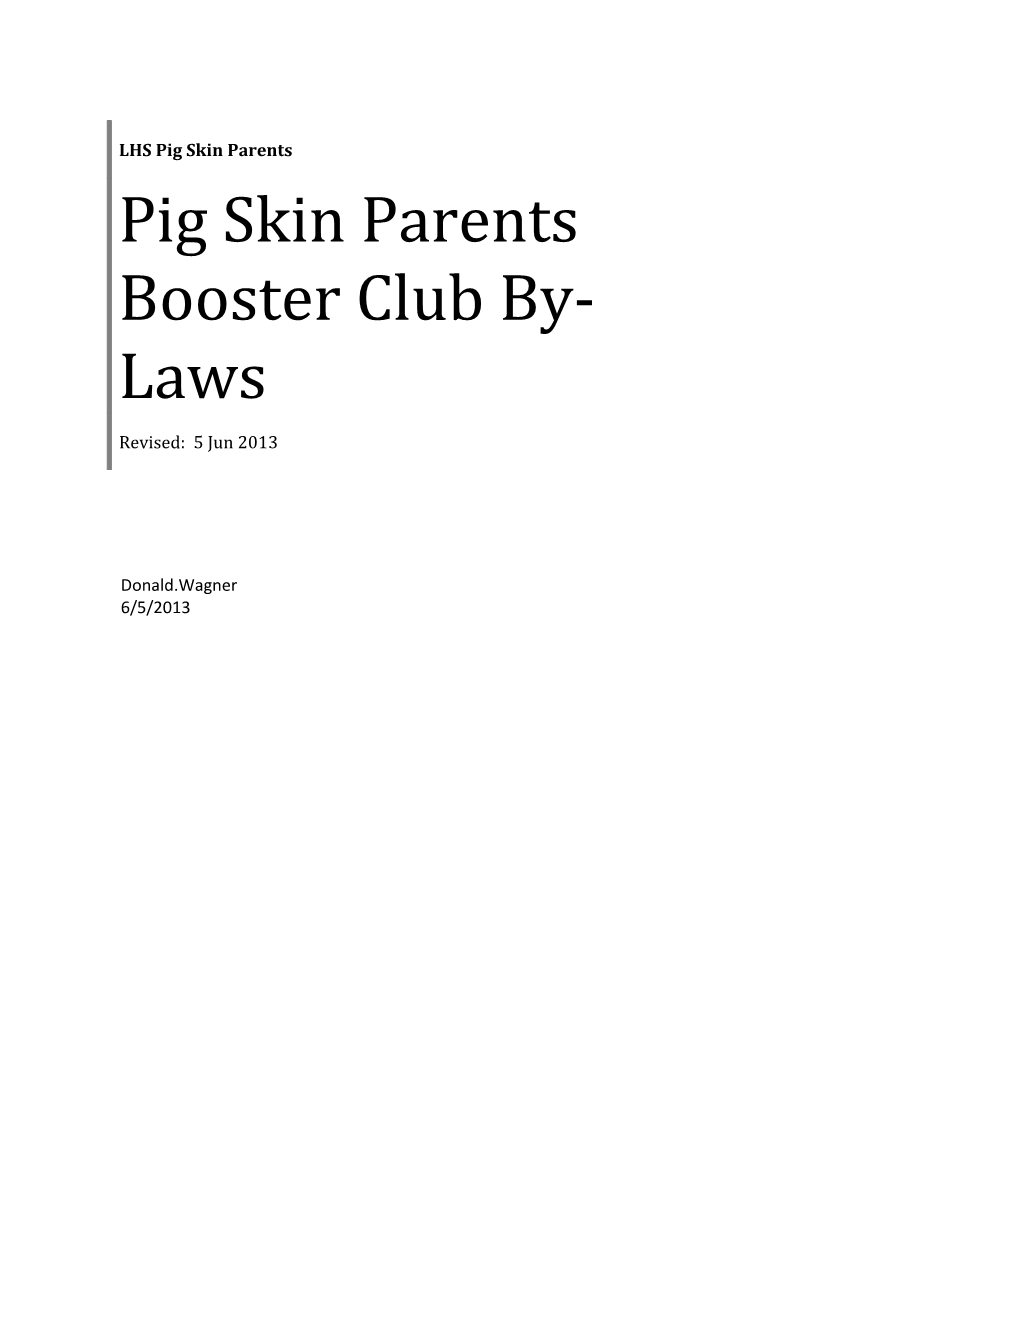 Pig Skin Parents Booster Club By-Laws